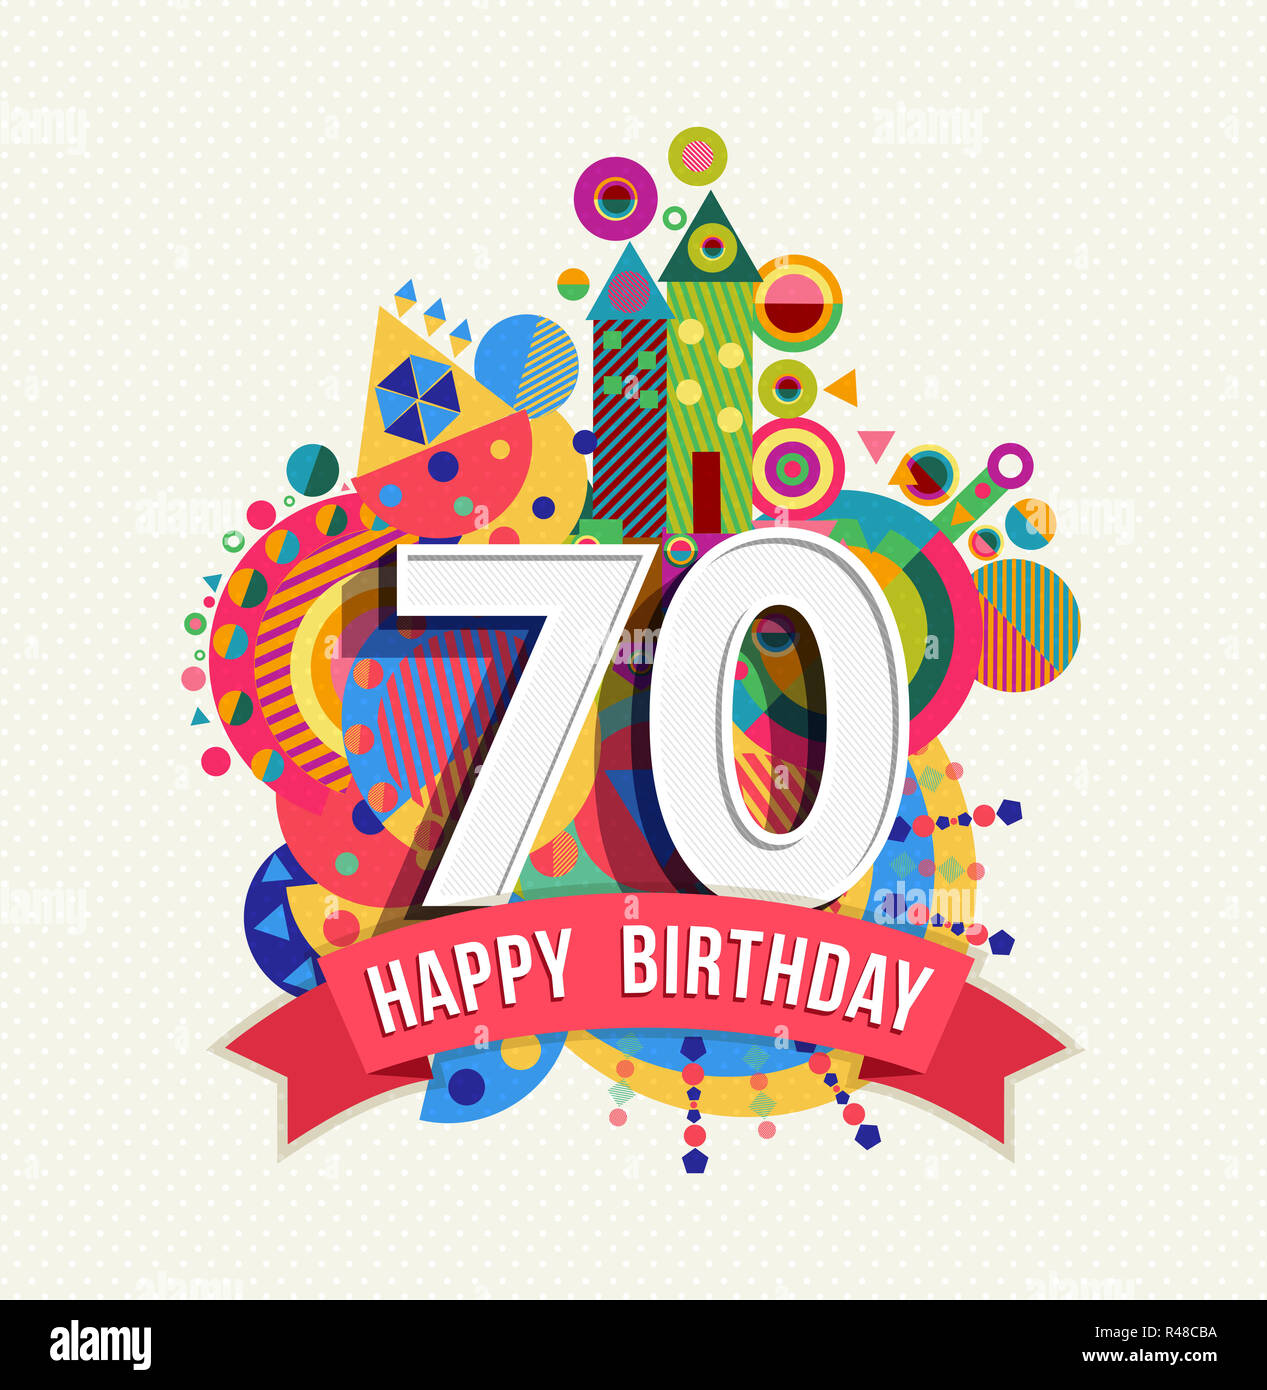 Happy birthday 70 year greeting card poster color Stock Photo - Alamy